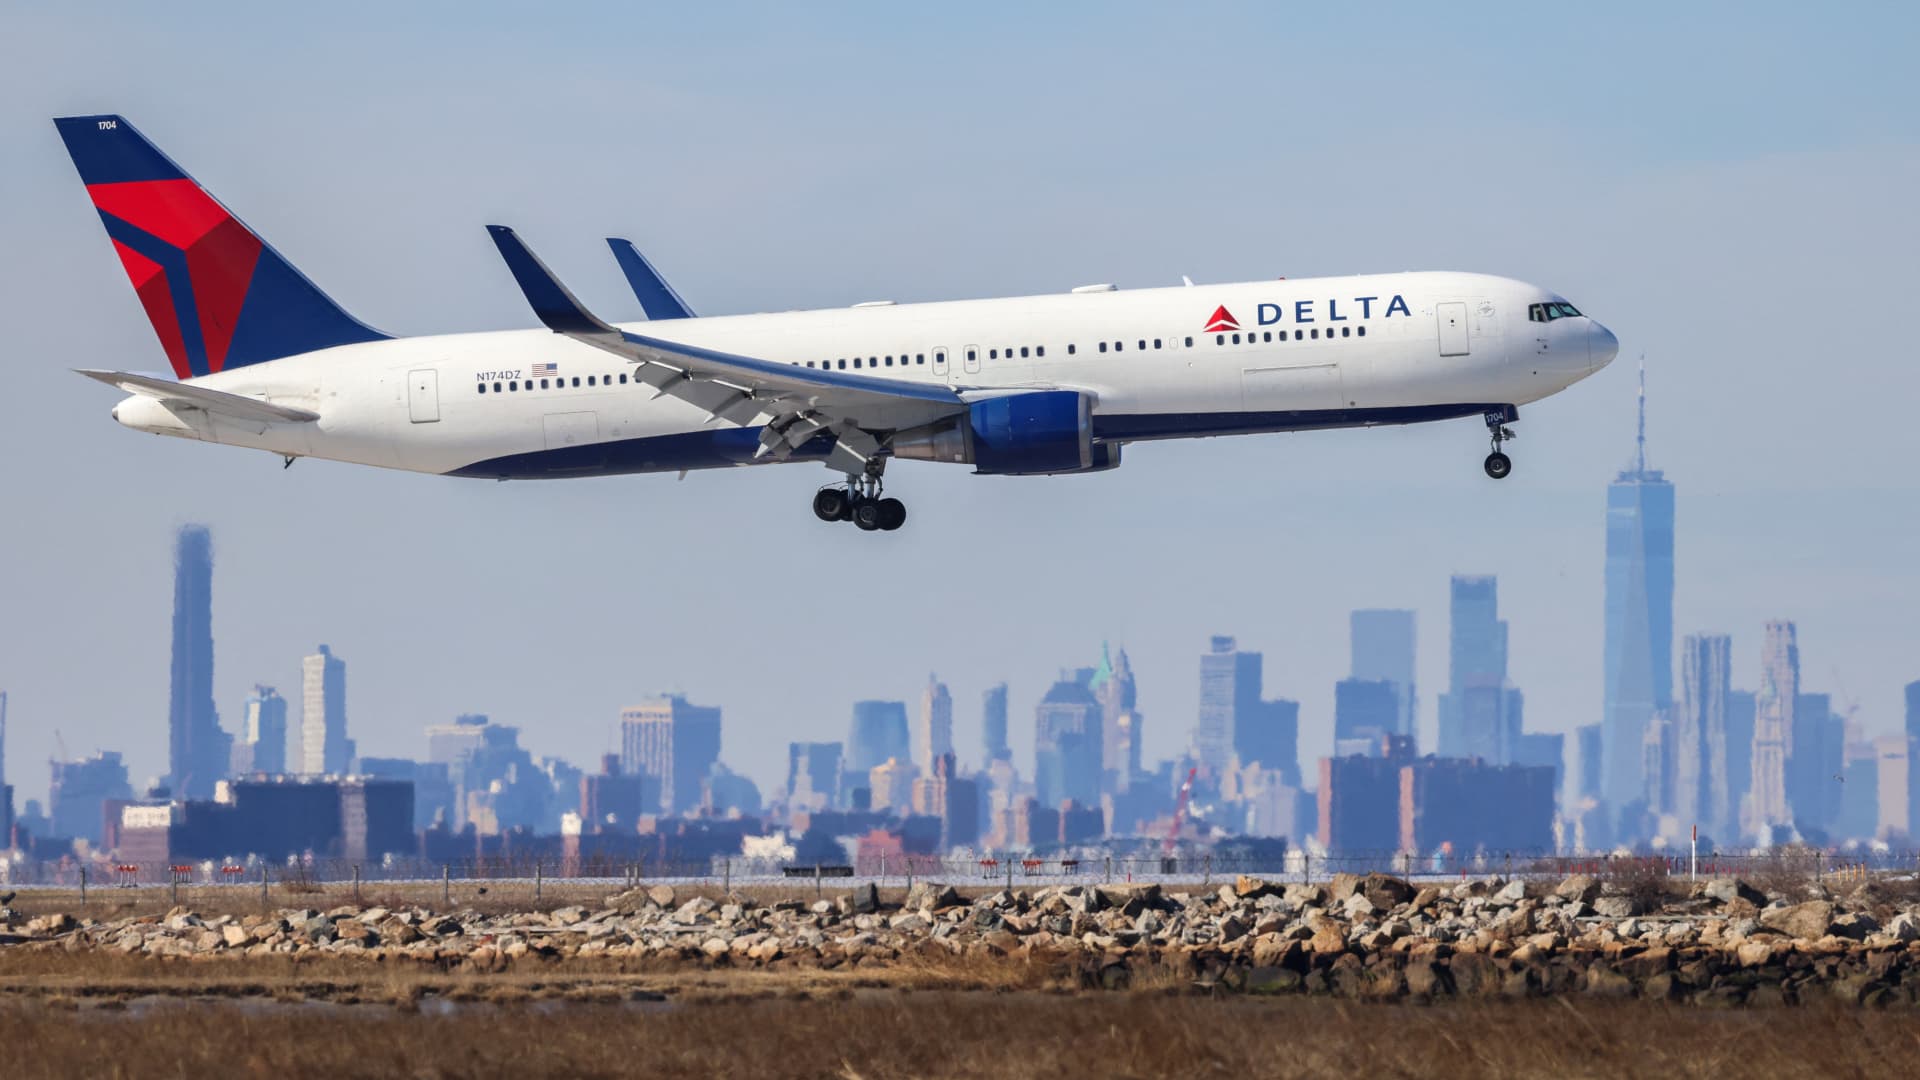 Delta is the latest airline to raise its checked bag fee